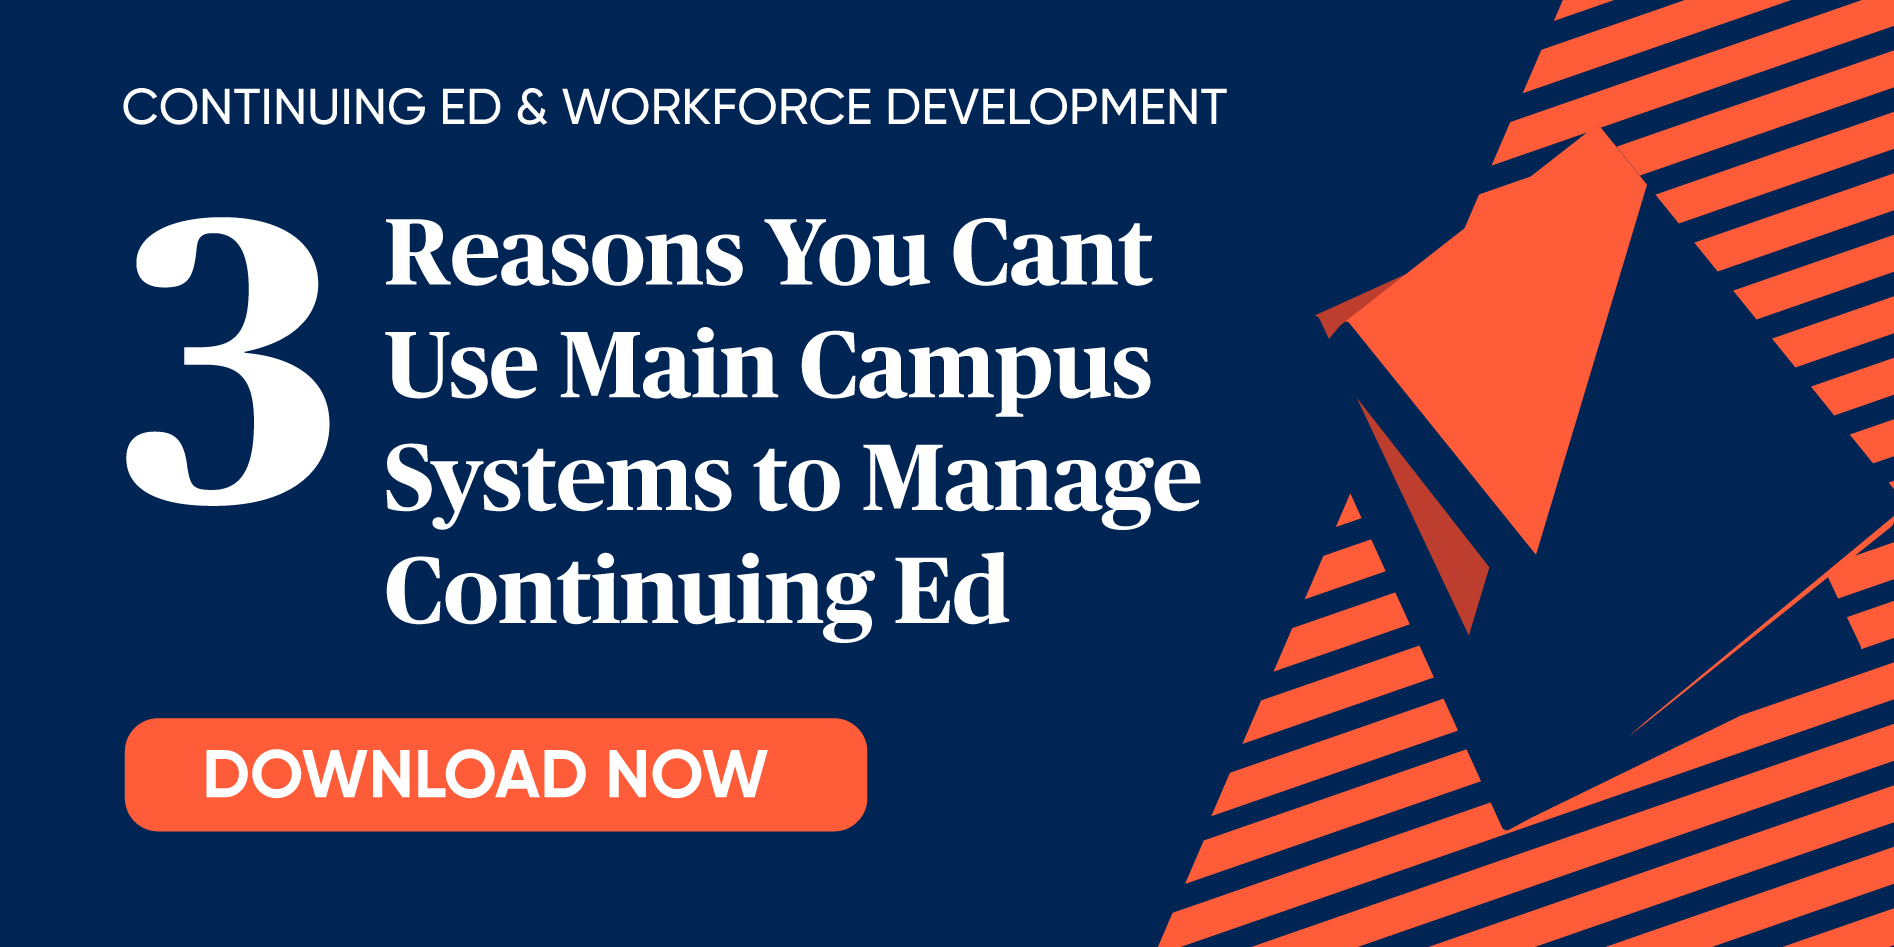 3 Reasons You Cant Use Main Campus Systems to Manage Continuing Ed